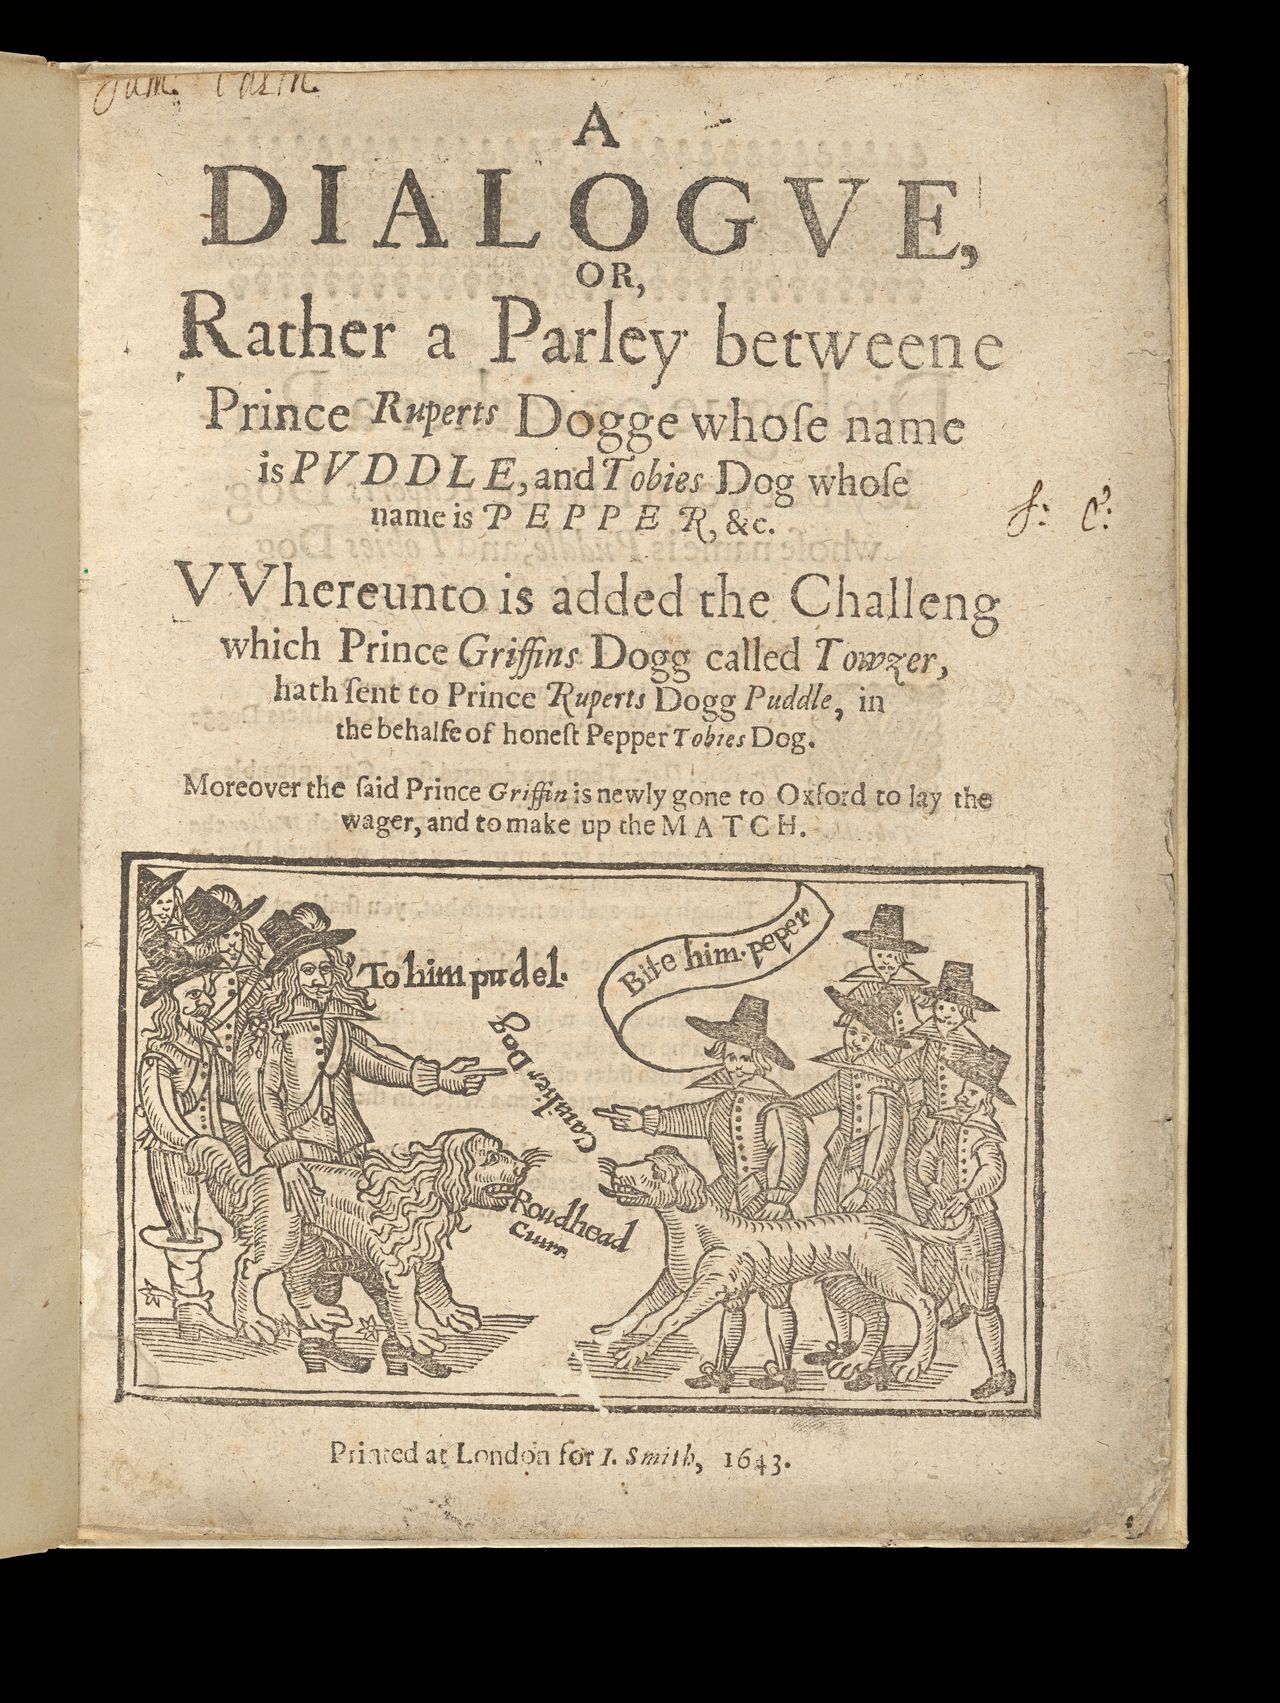 John Taylor (attributed), <em>A dialogue, or, Rather a parley betweene Prince Ruperts dogge whose name is Puddle, and Tobies dog whose name is Pepper...</em>, London, printed for I. Smith, 1643, State Library Victoria, Melbourne (RAREEMM 515/28)